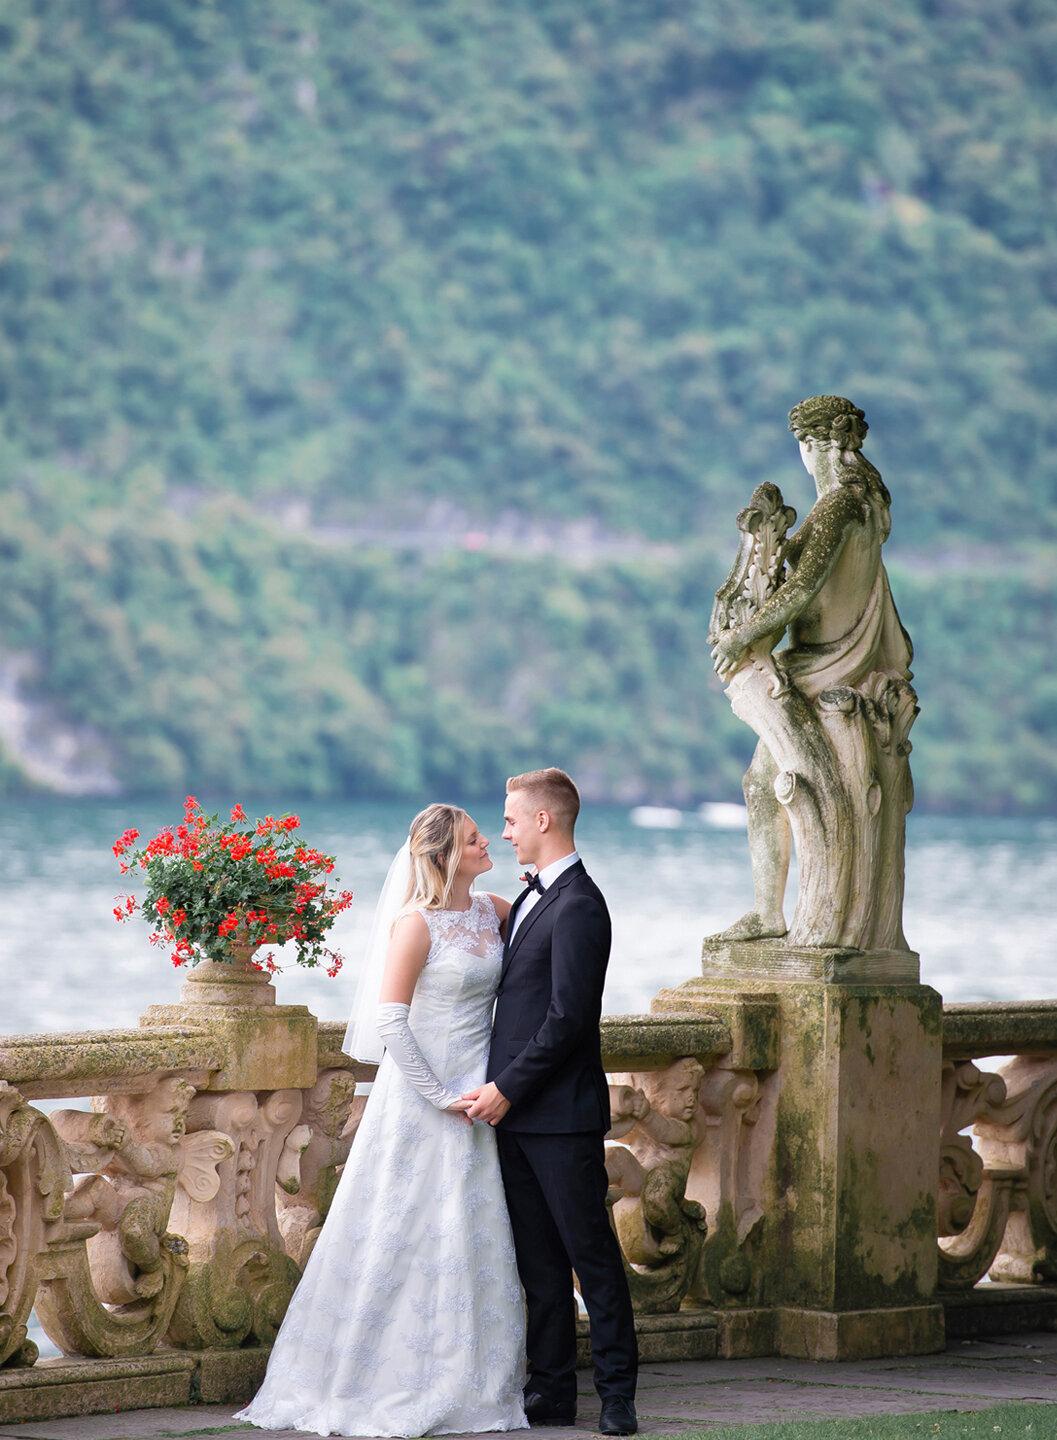 Bride and groom on the villa's terrace